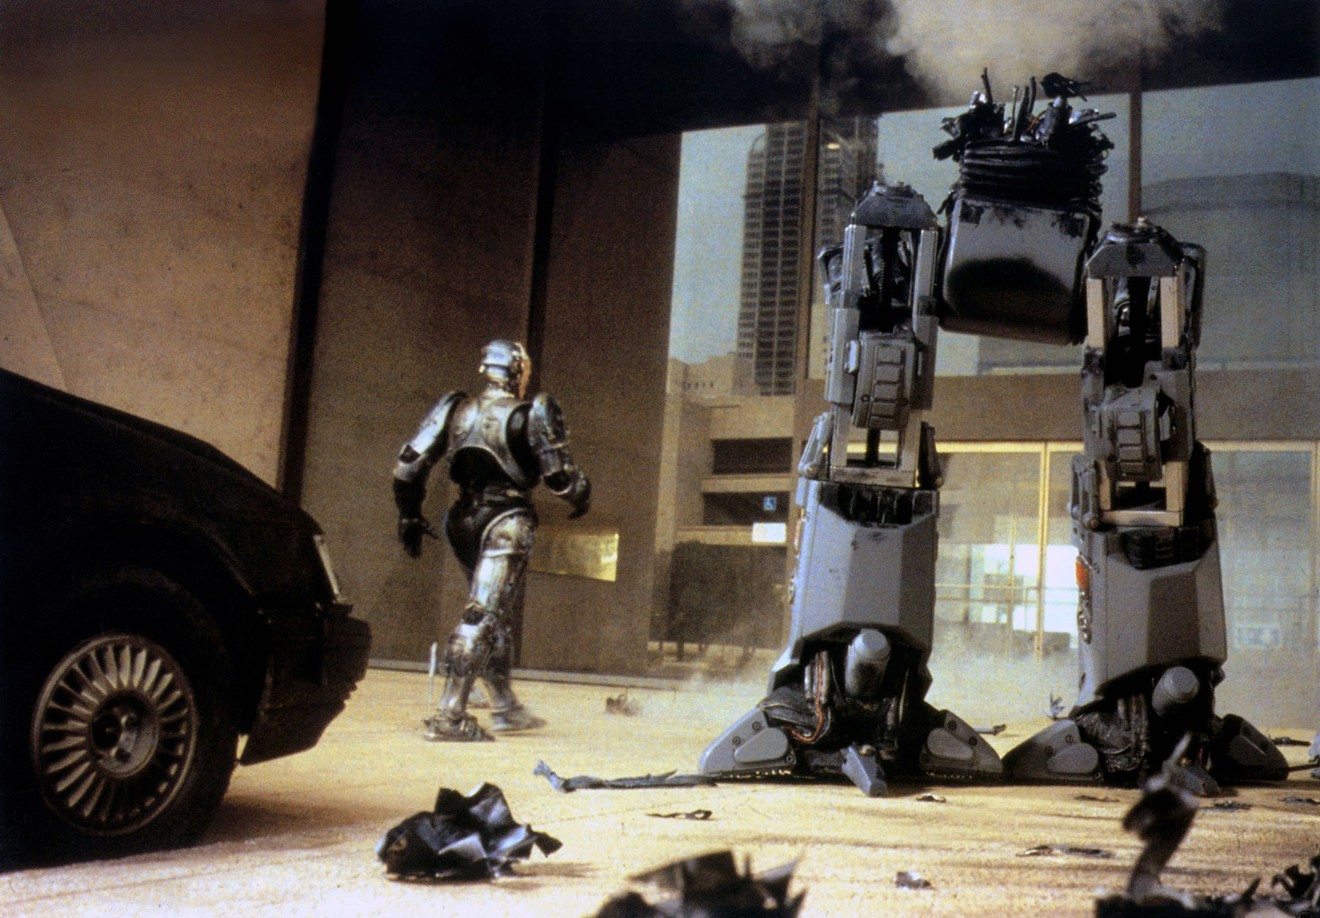 In one of the final scenes, RoboCop destroys ED-209, and then enters OCP headquarters (Dallas City Hall).